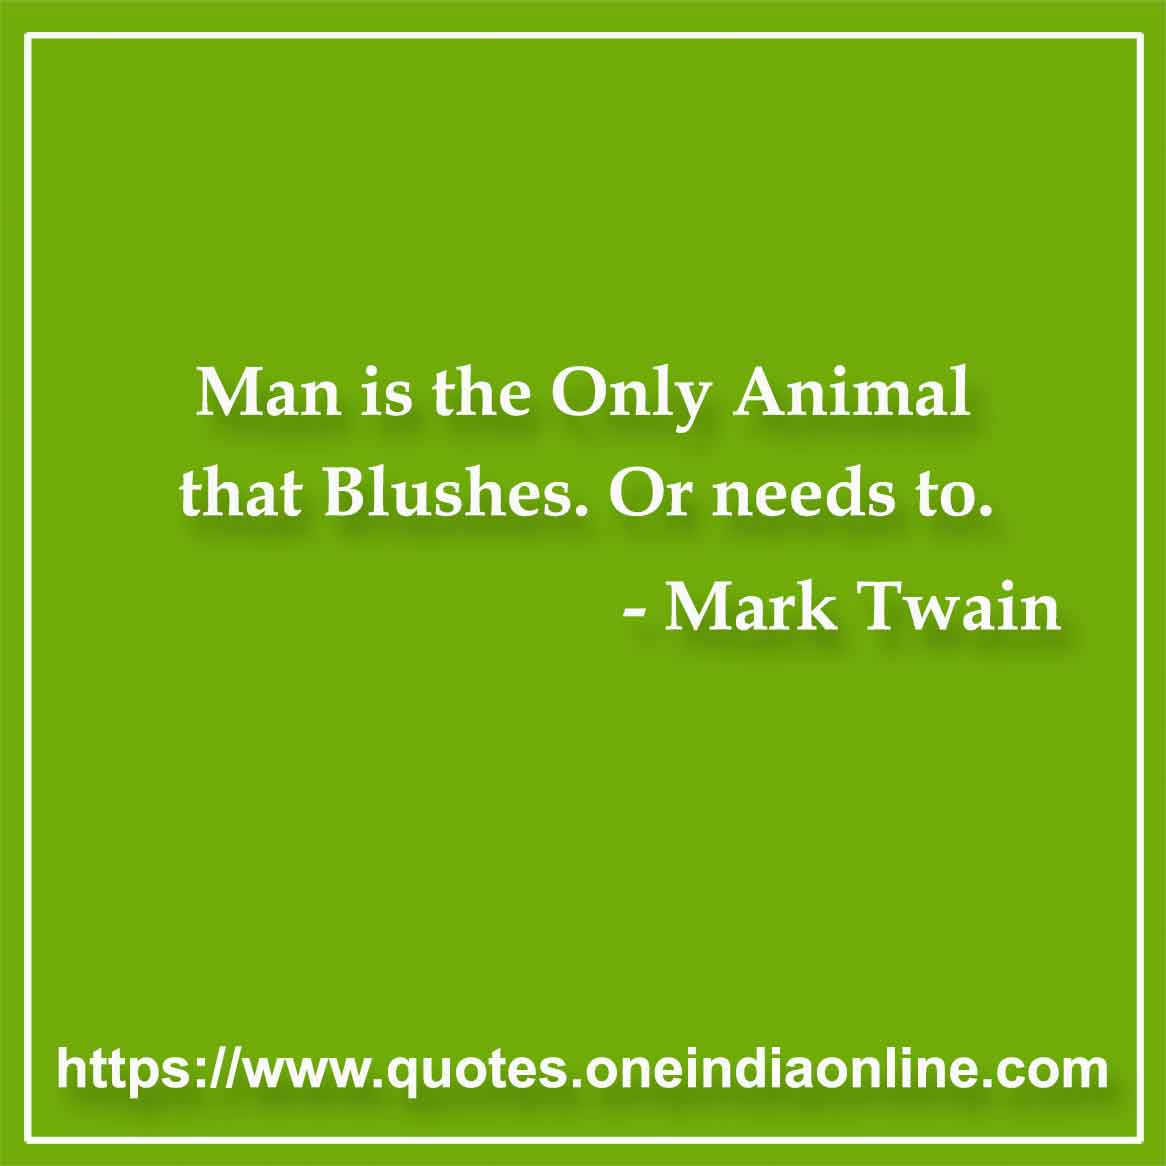 Man is the Only Animal that Blushes. Or needs to.